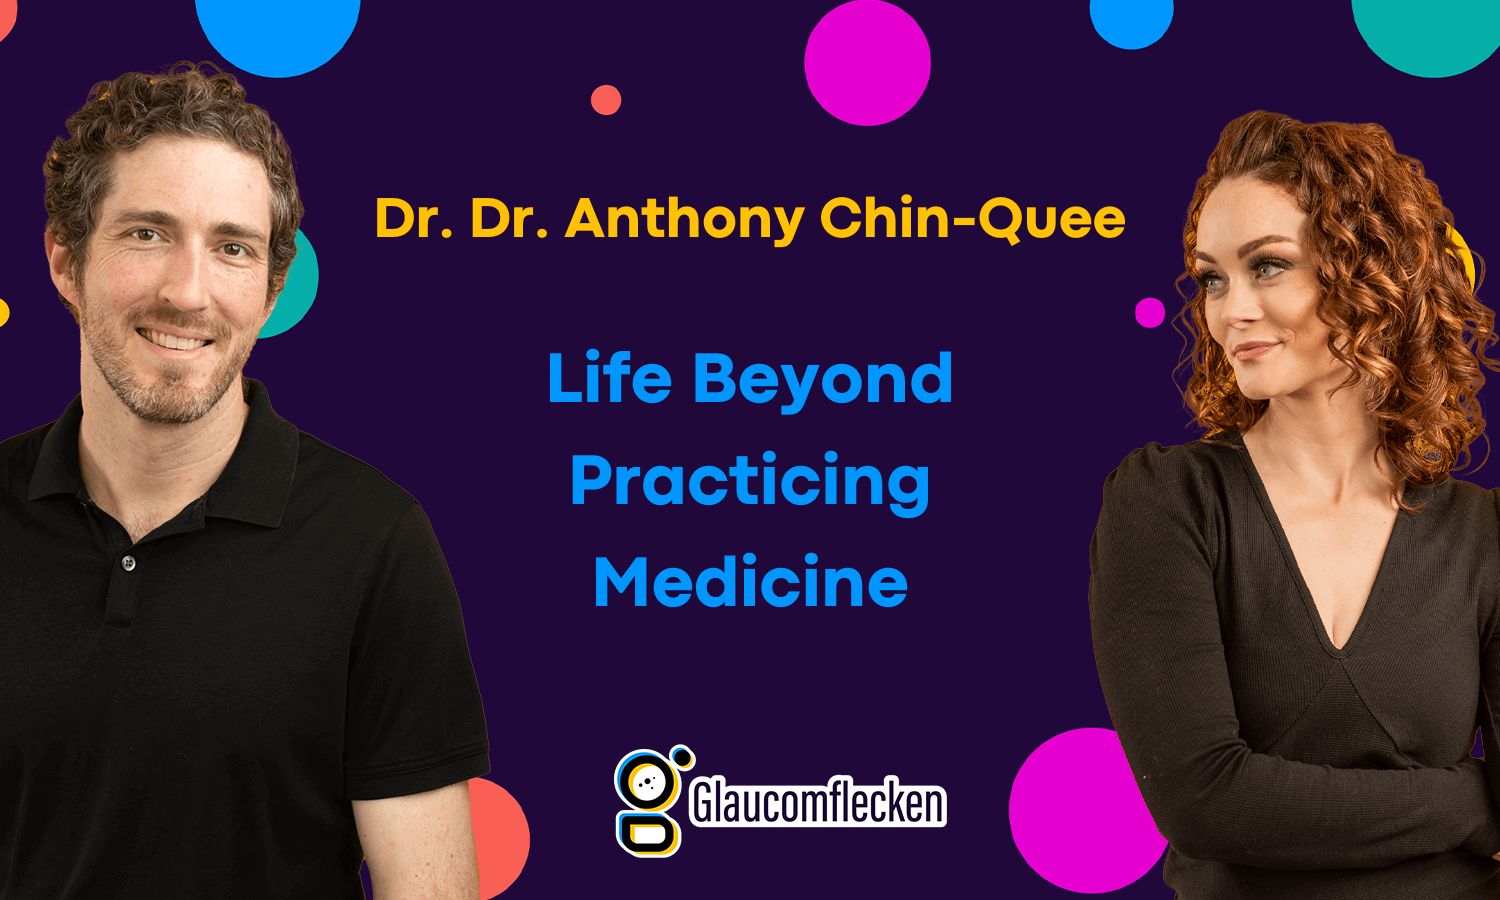 Title Image: Dr. Anthony Chin-Quee Life Beyond Practicing Medicine